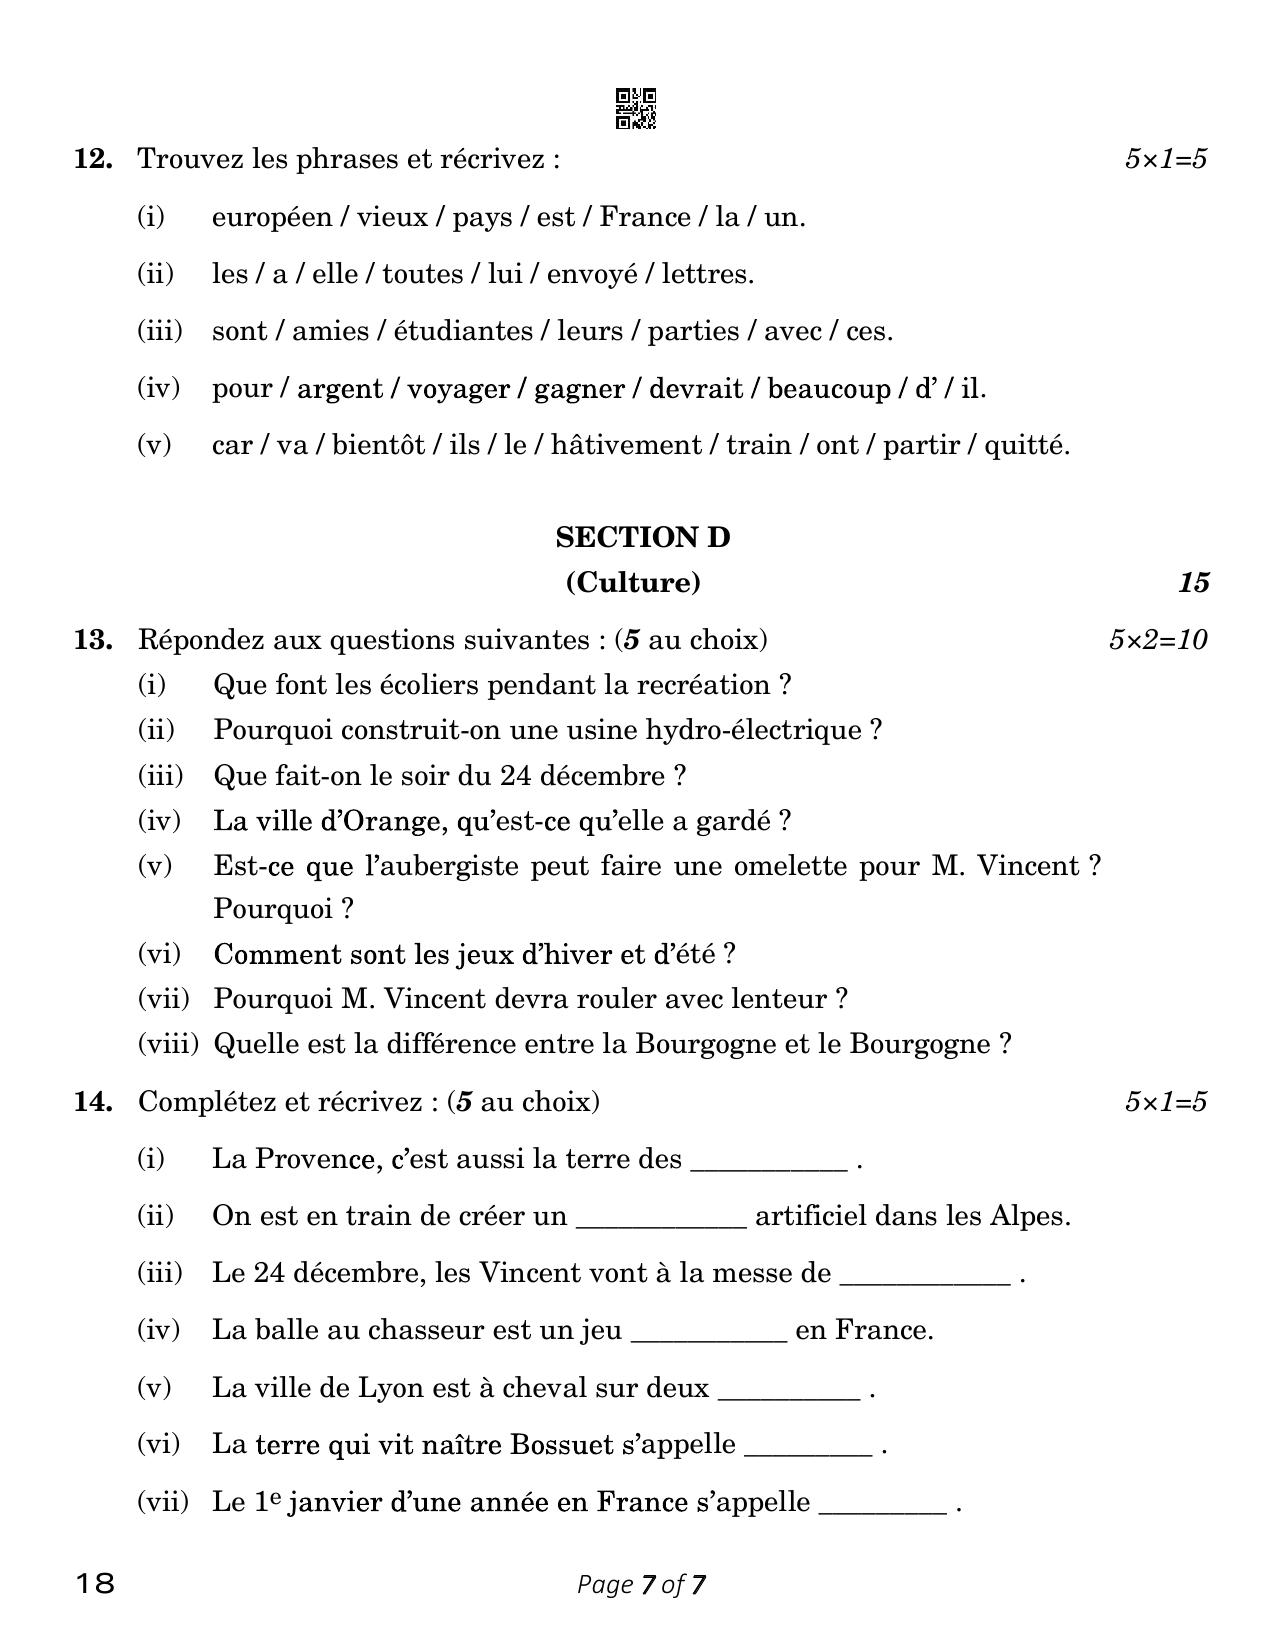 CBSE Class 12 French (Compartment) 2023 Question Paper - Page 7